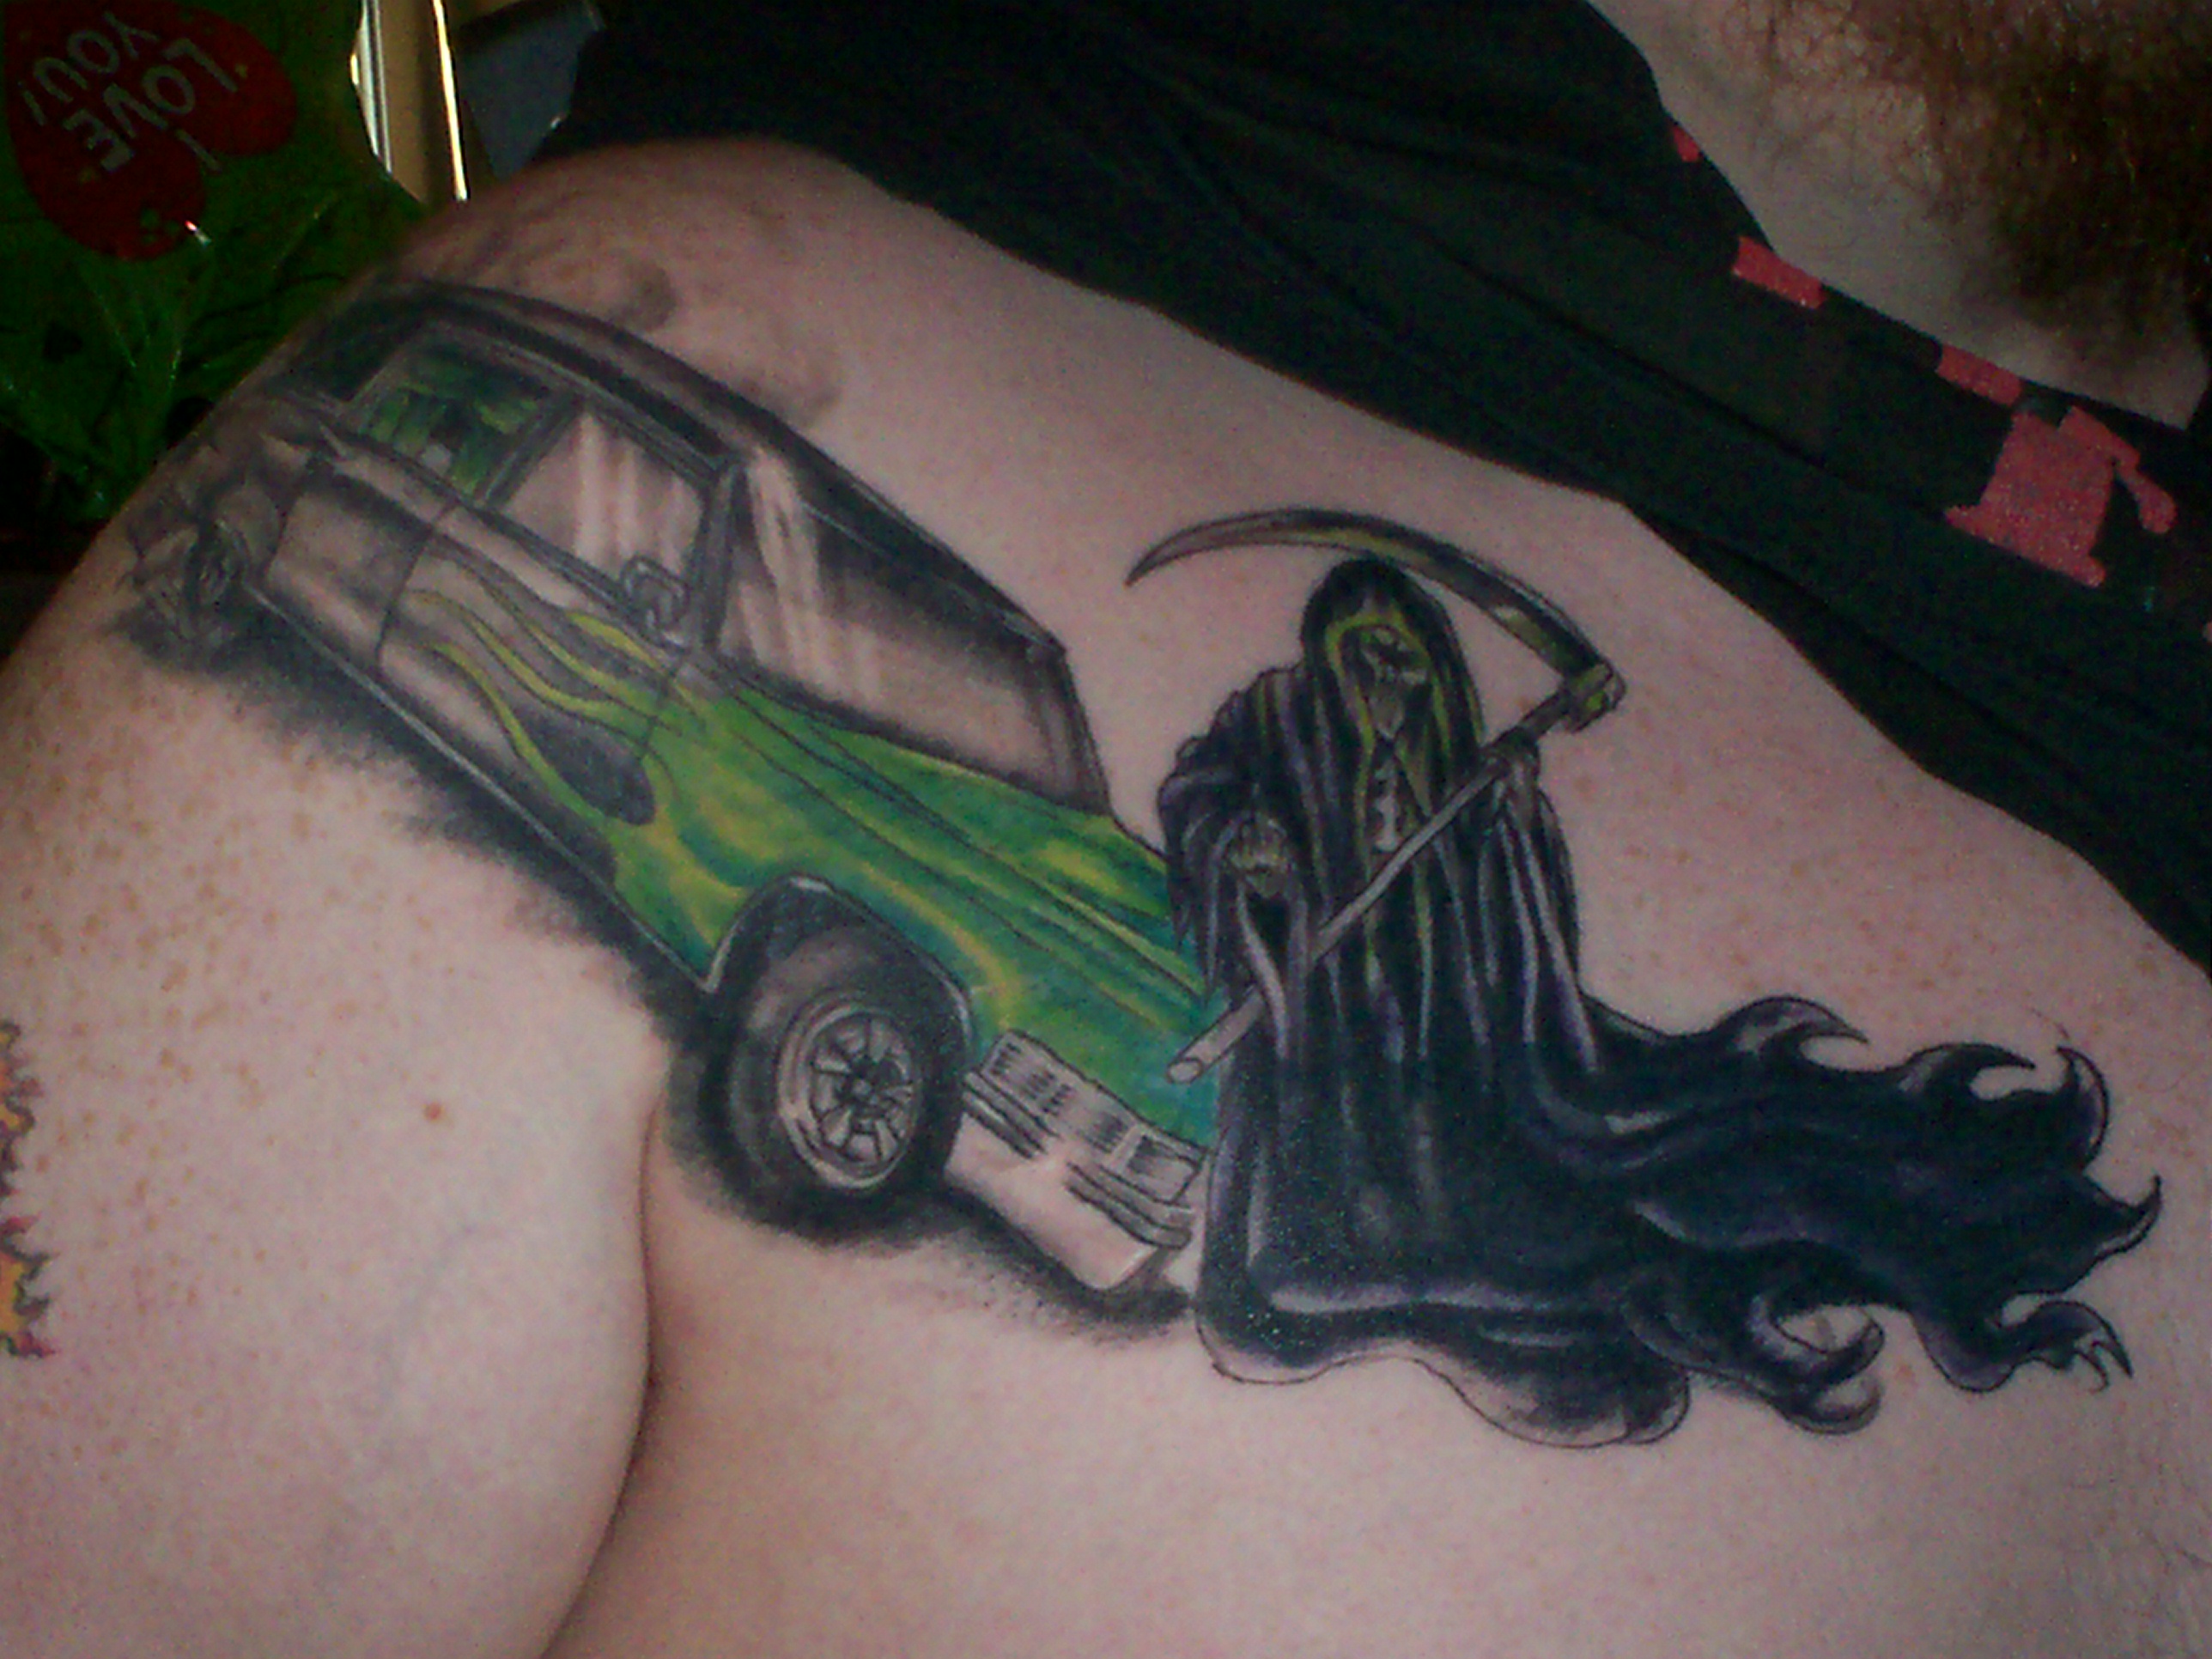 my favorite tattoo black hearse with green flames with the grim reaper flipping you off 